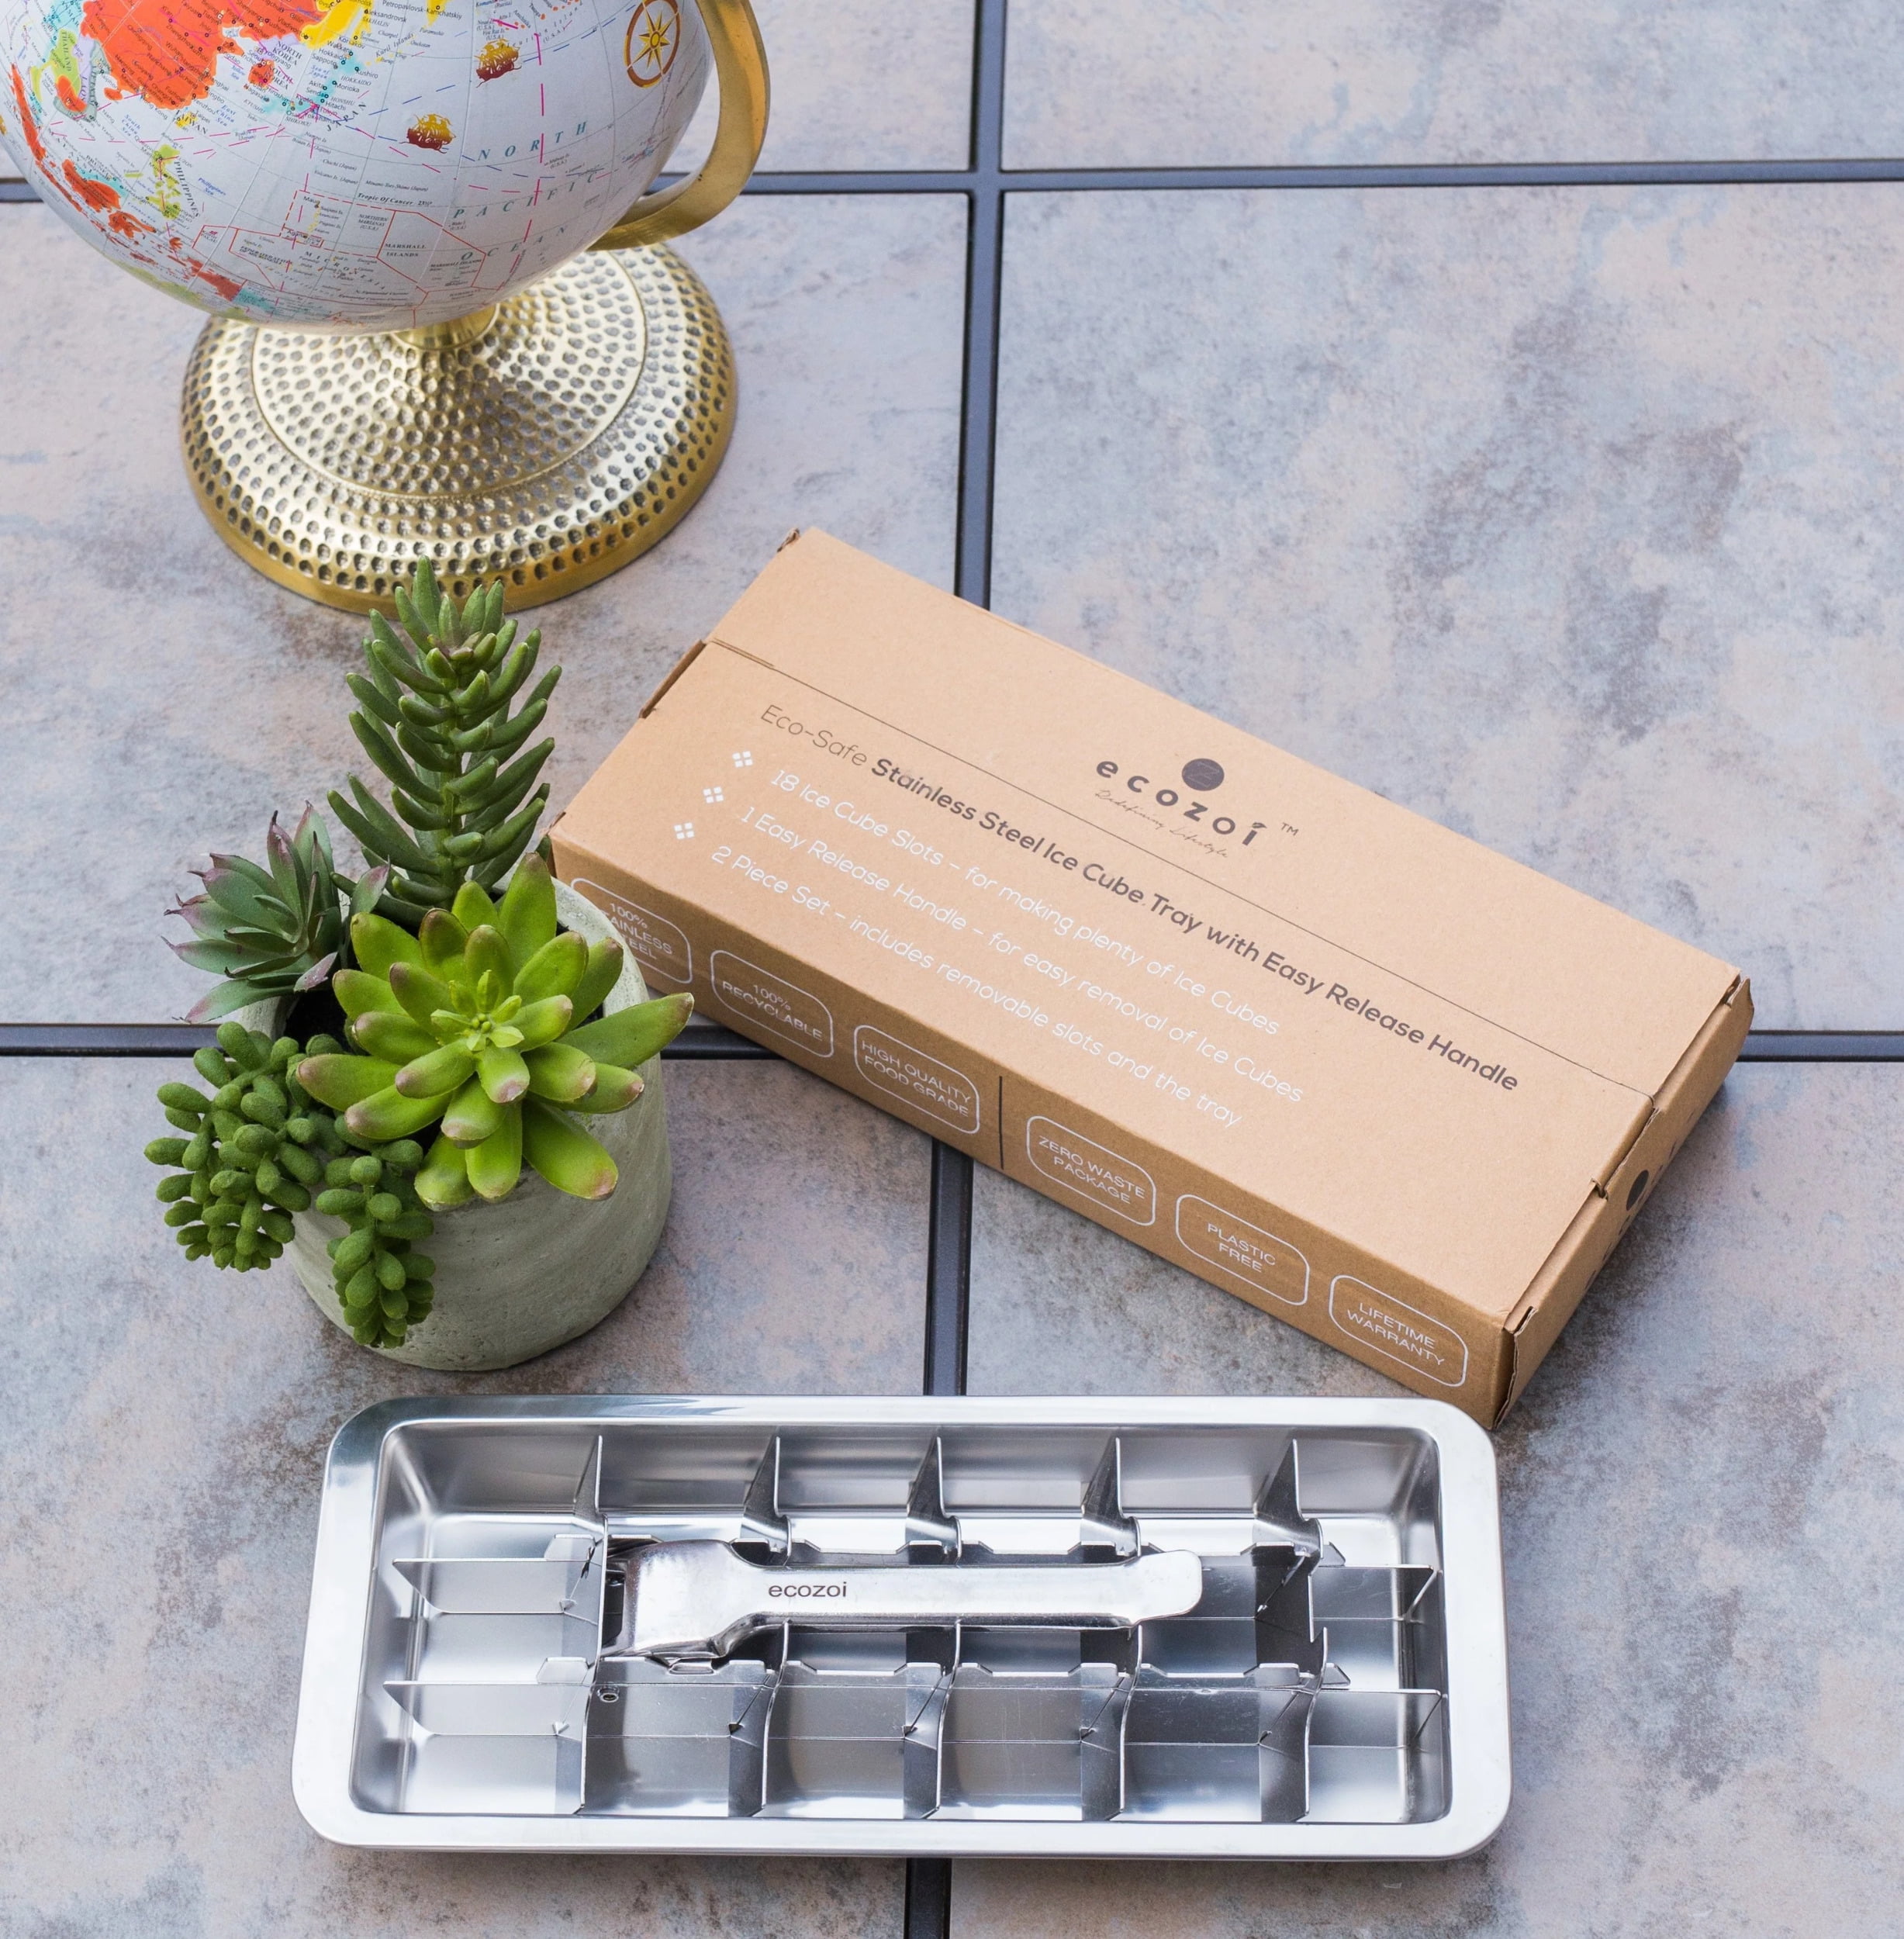 Stainless Steel Ice Cube Tray  Childhood memories, Childhood memories 70s,  Vintage memory